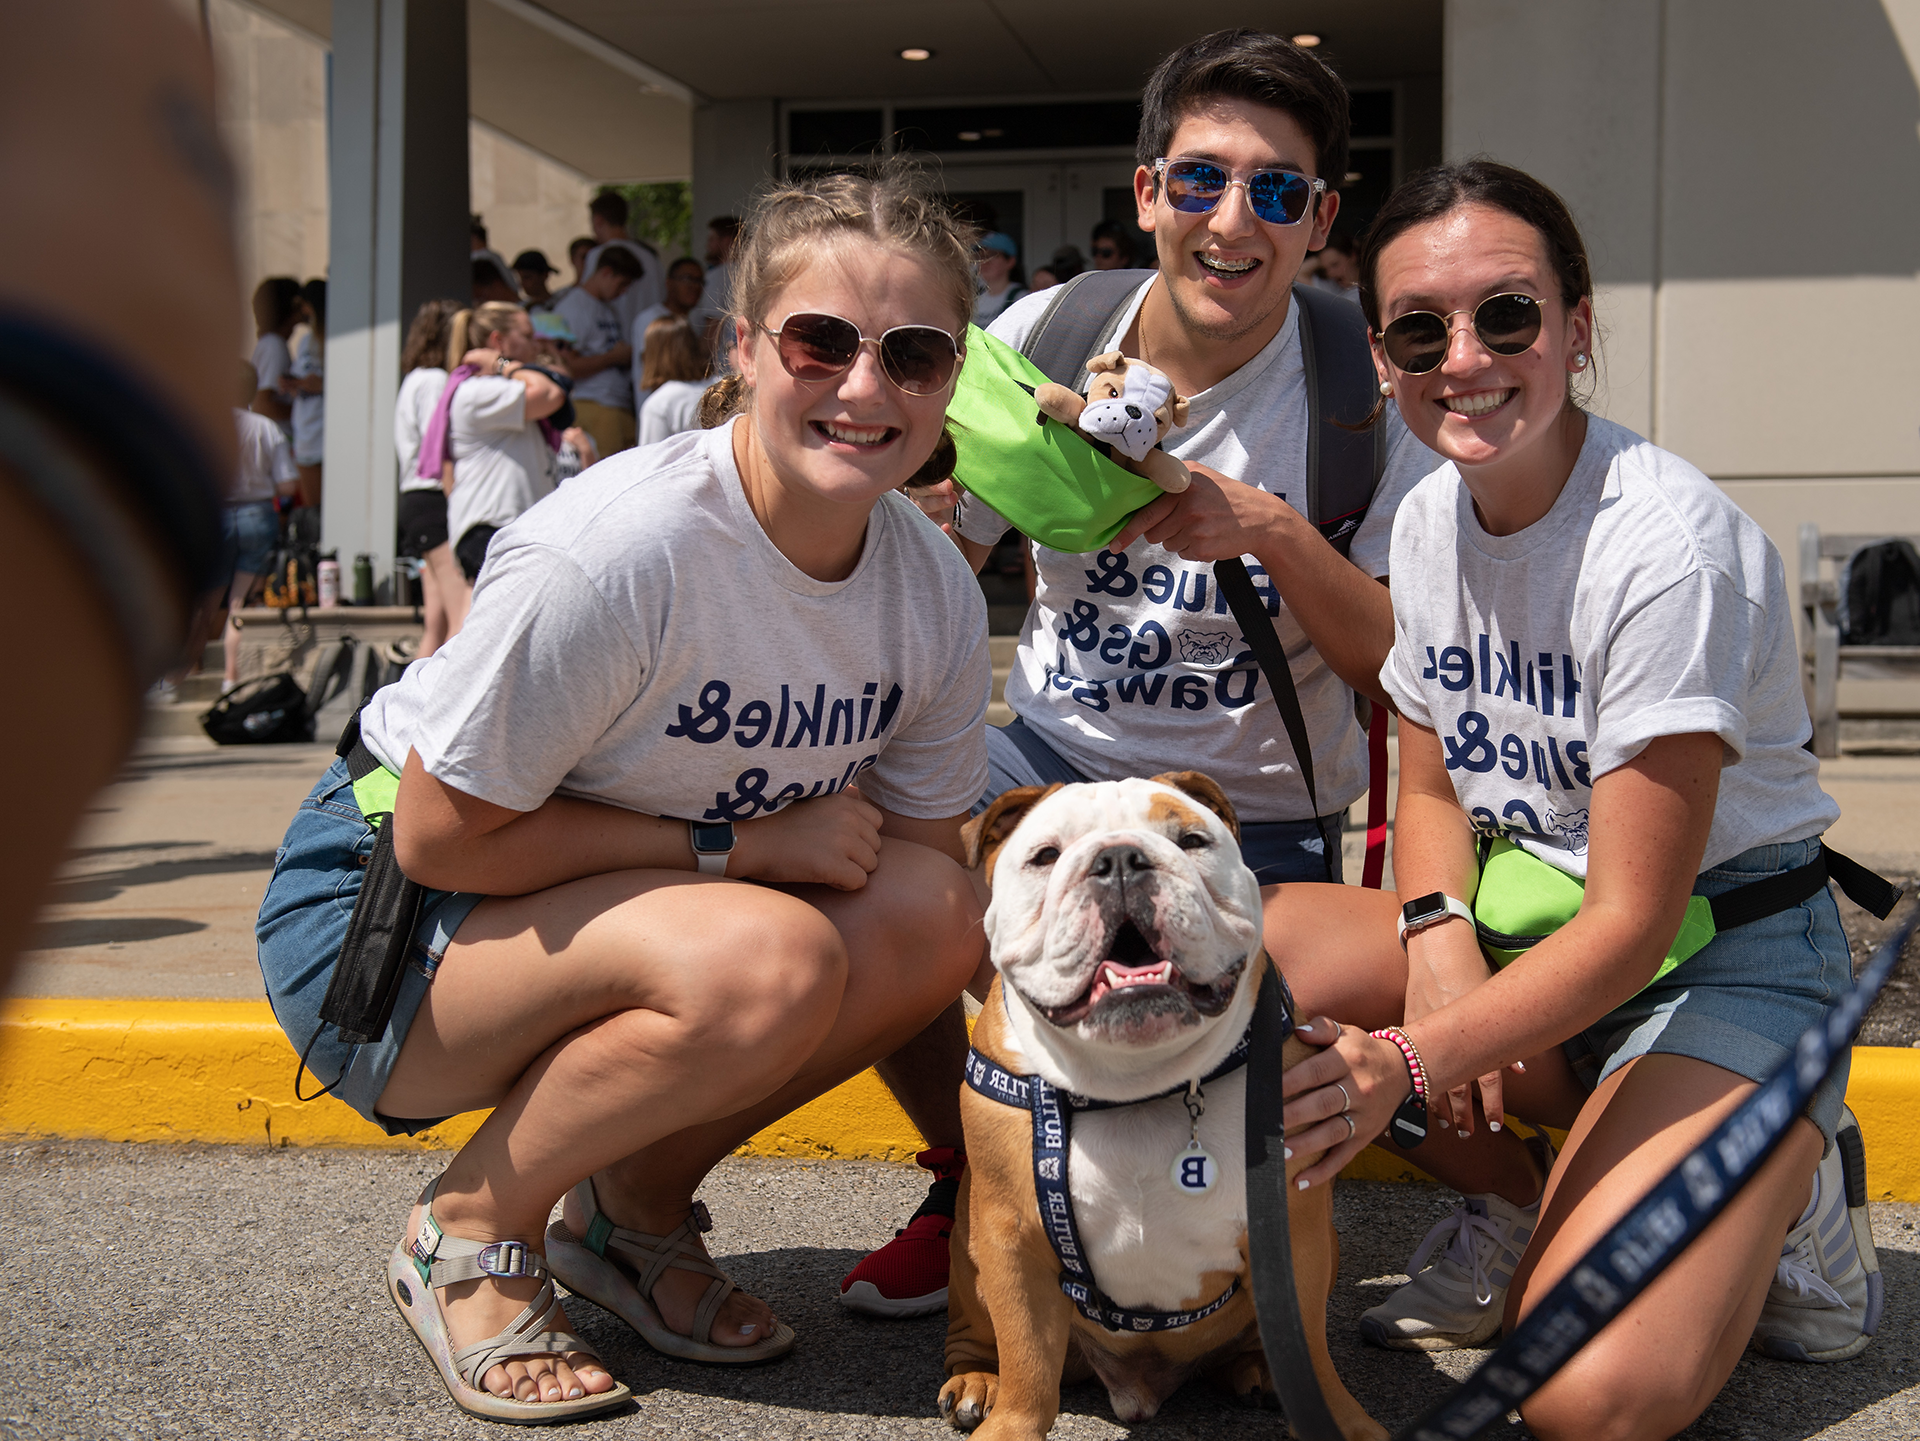 Bulldog in a Butler harness and leash with 3 students around him in white t-shirts and sunglasses